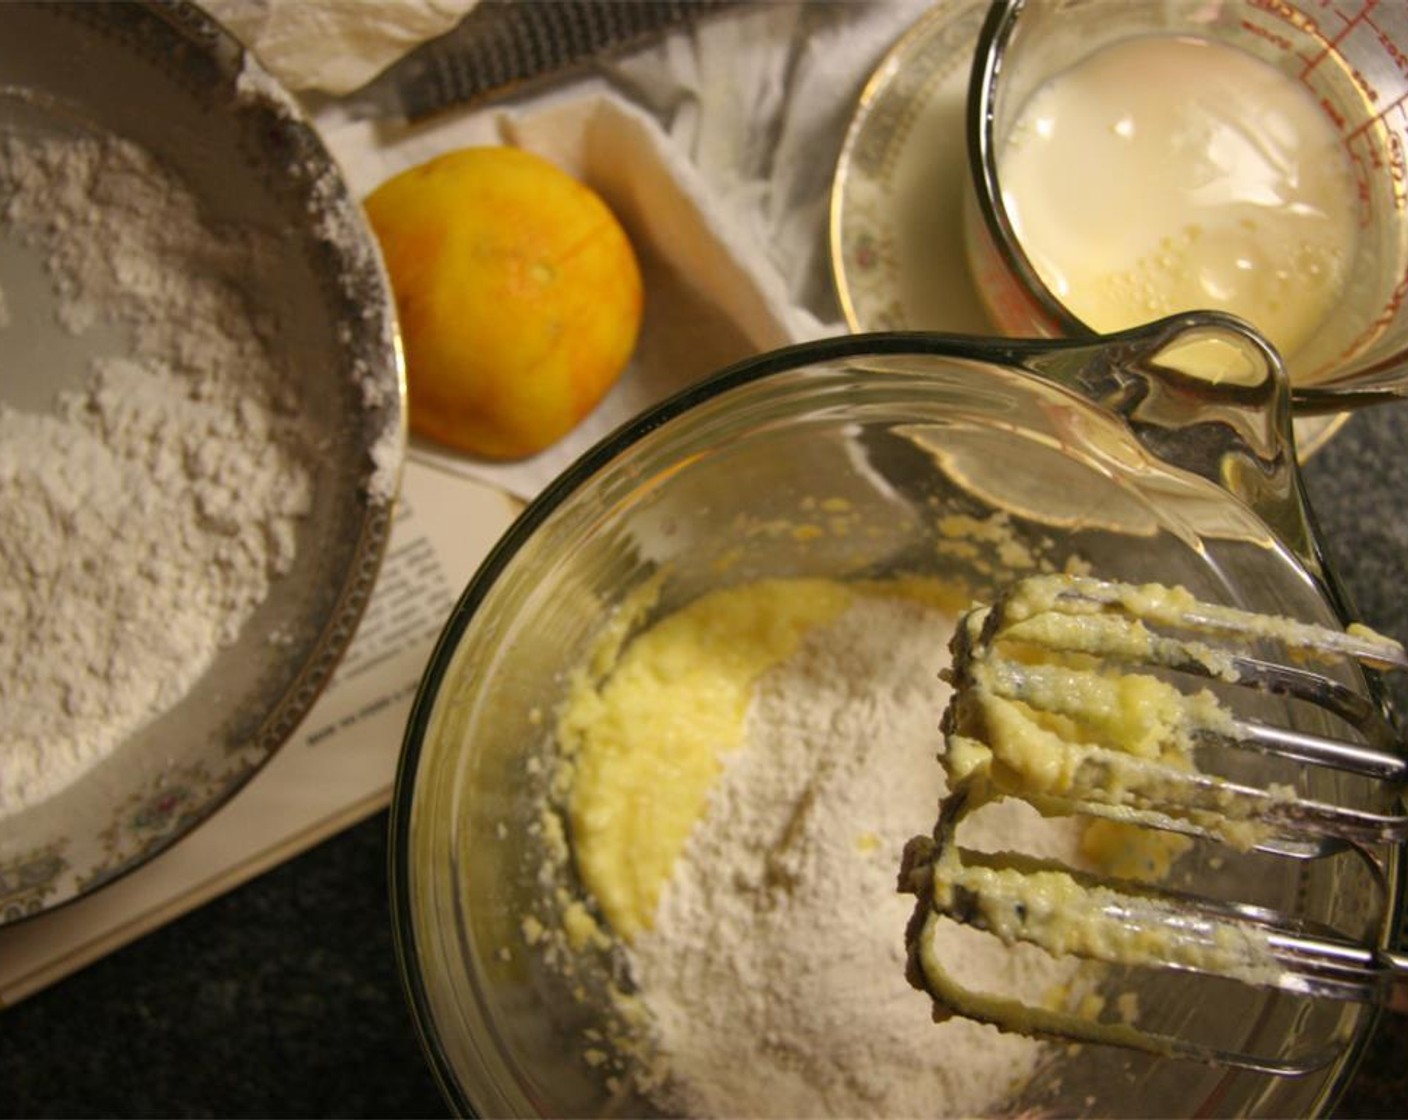 step 3 In another bowl, cream the Unsalted Butter (1/4 cup), zest from the Orange (1) and Granulated Sugar (1/2 cup) until light and fluffy. Add the Egg (1) and beat until incorporated. Mix in half of the flour mixture.